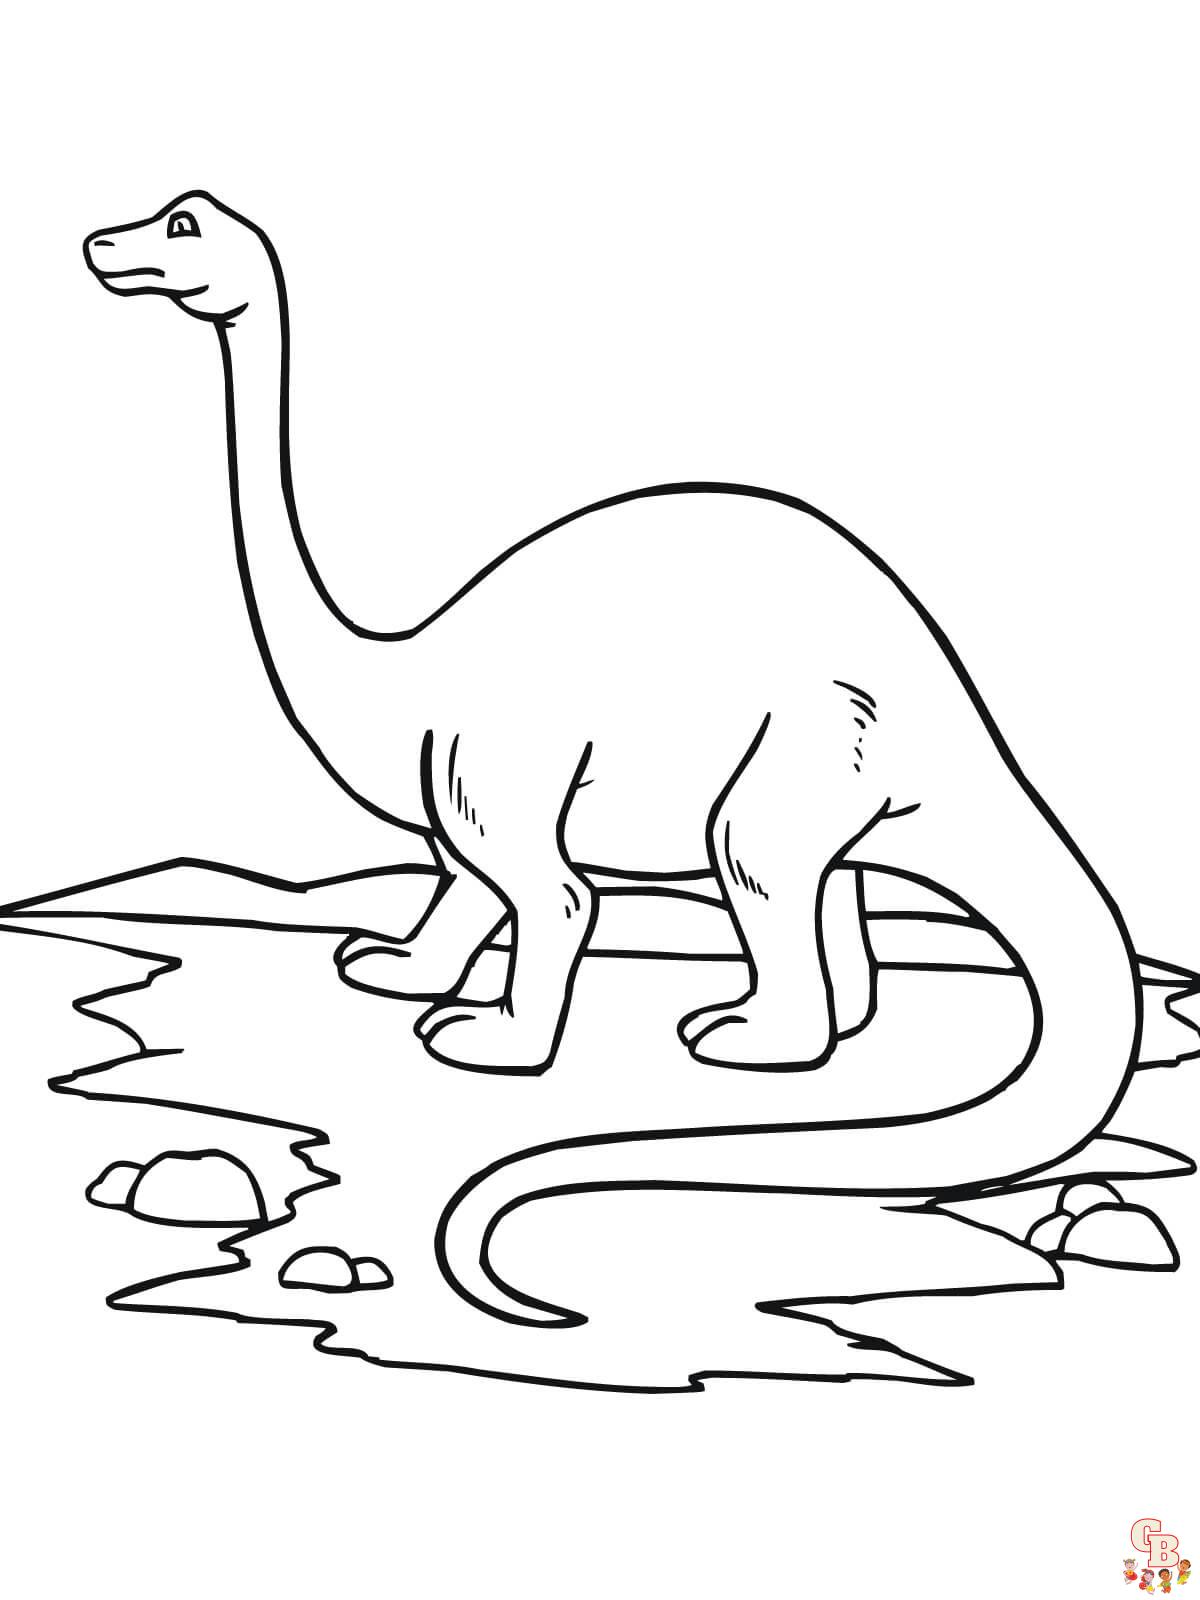 Brontosaurus Coloring Pages 7